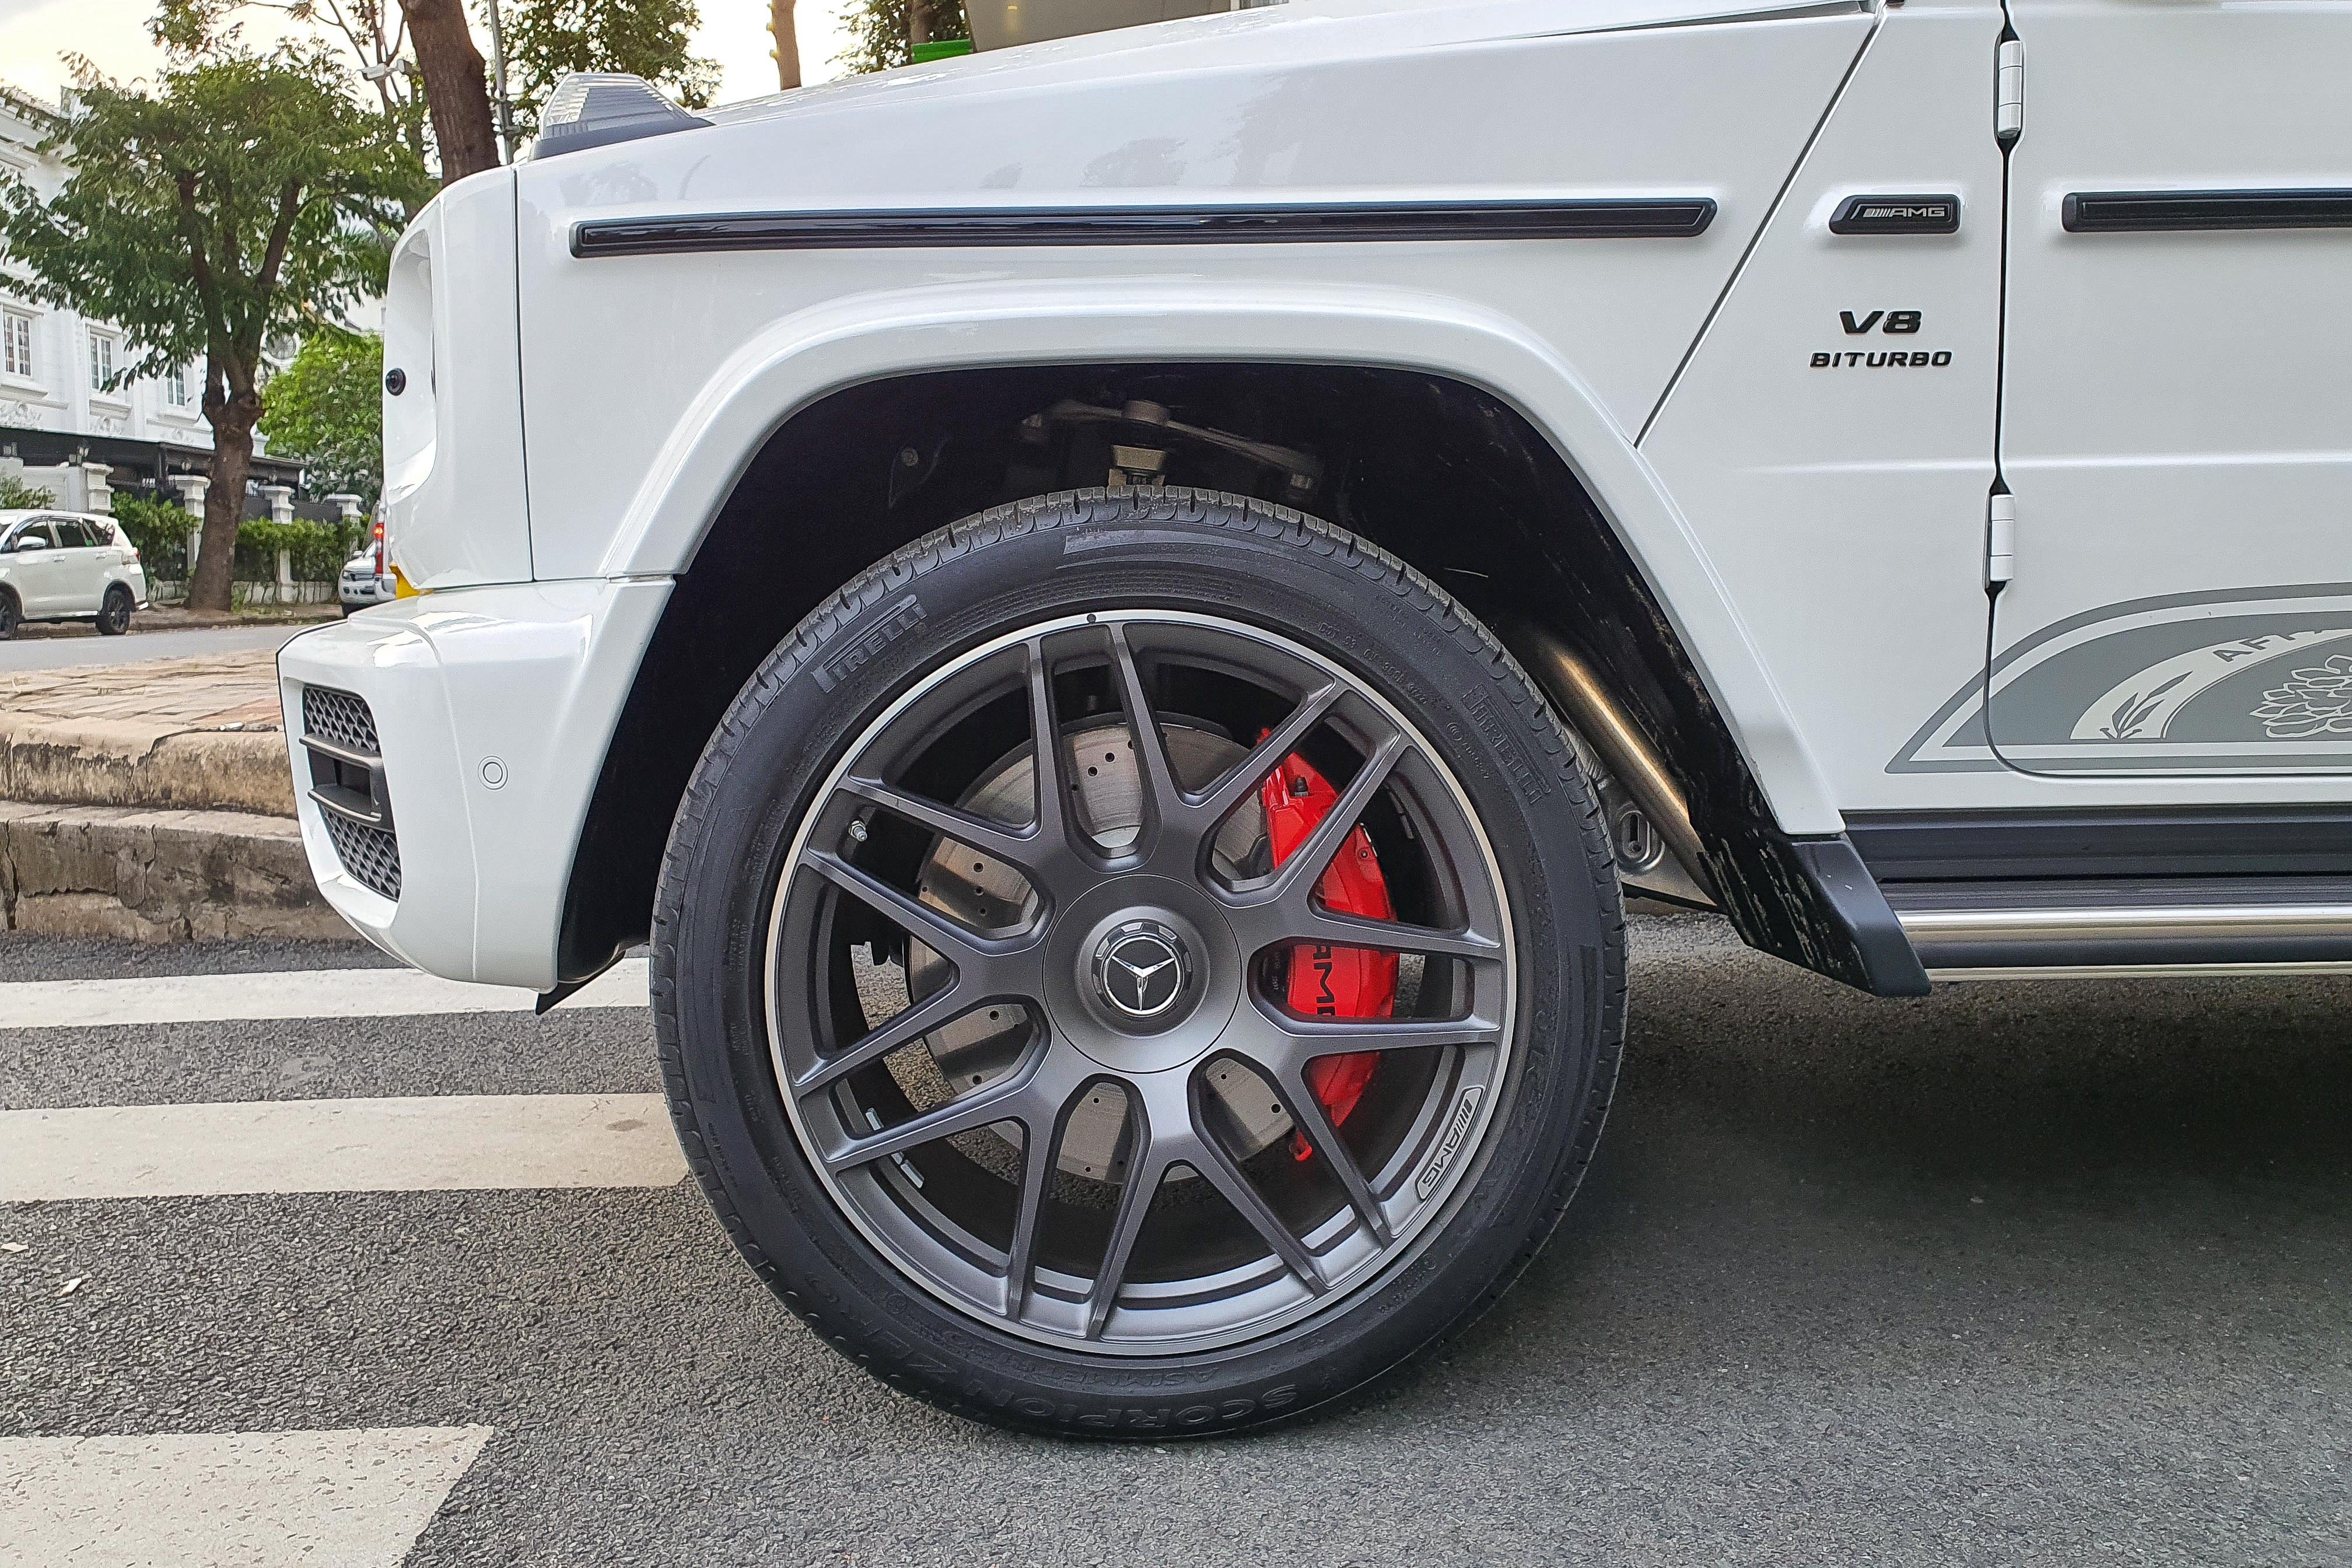 mercedes,  benz,  mercedes-benz,  amg,  mercedes-amg,  g63,  g 63,  edition 55,  g63 edition 55,  suv,  hieu suat cao,  g 63 edition 55 anh 6